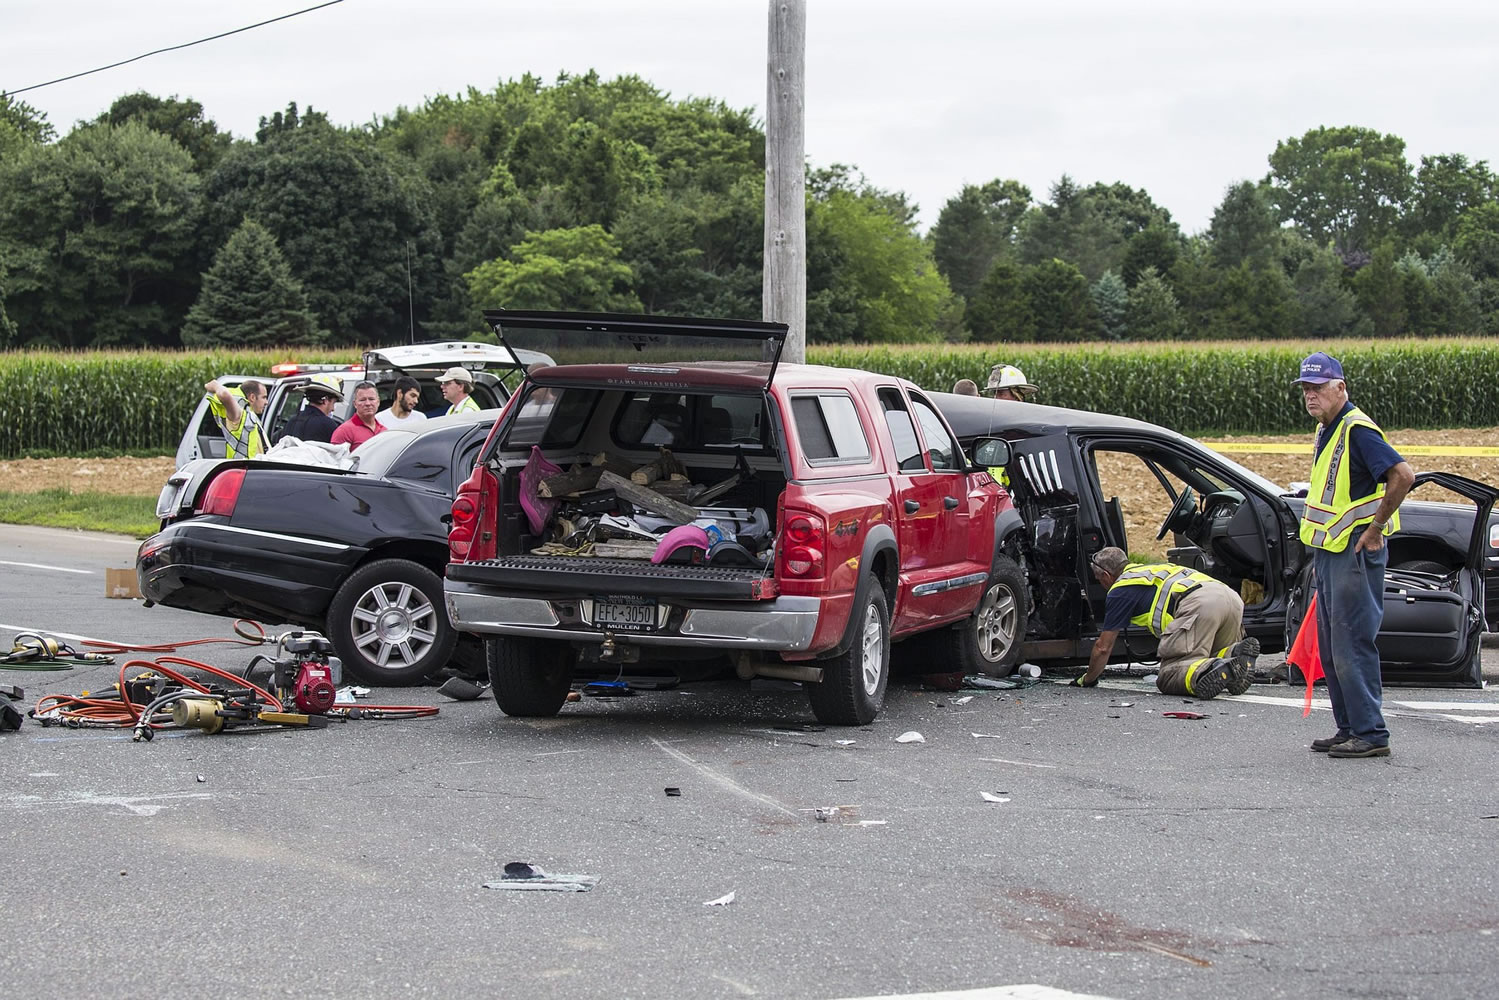 Authorities investigate the scene of a fatal crash between a limousine and a pickup truck Saturday in Cutchogue, N.Y.